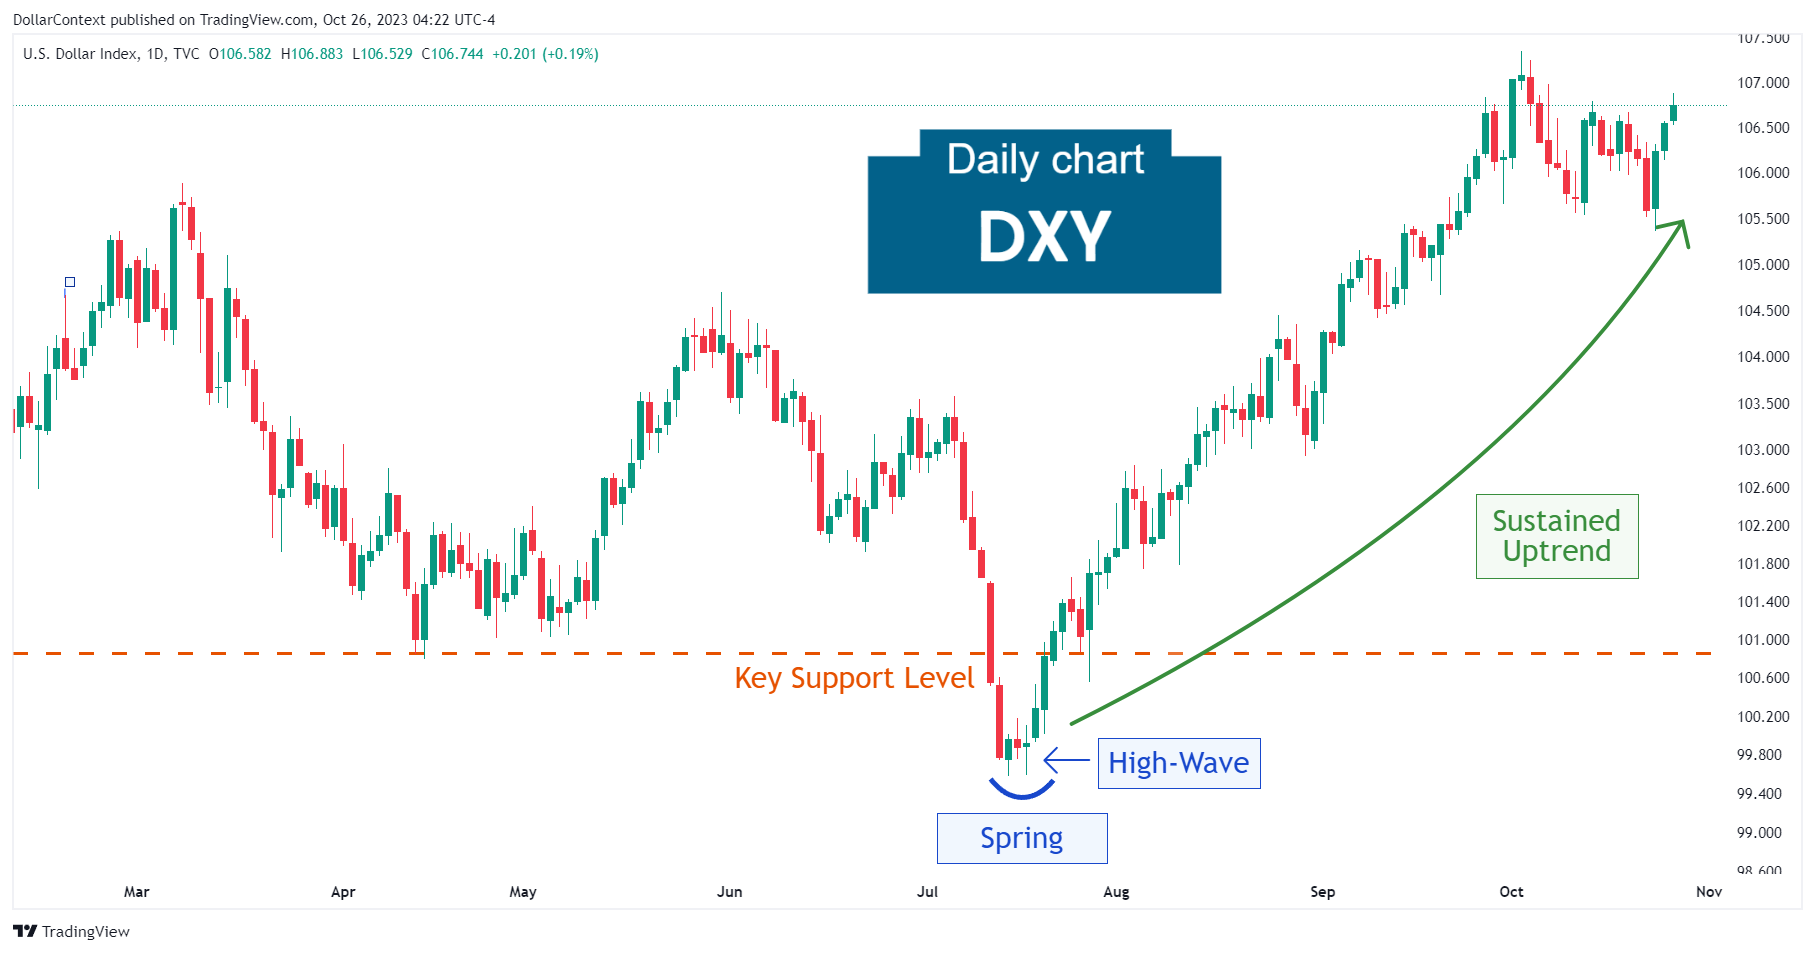 DXY: Sustained Uptrend from July to October 2023 (Daily Chart)